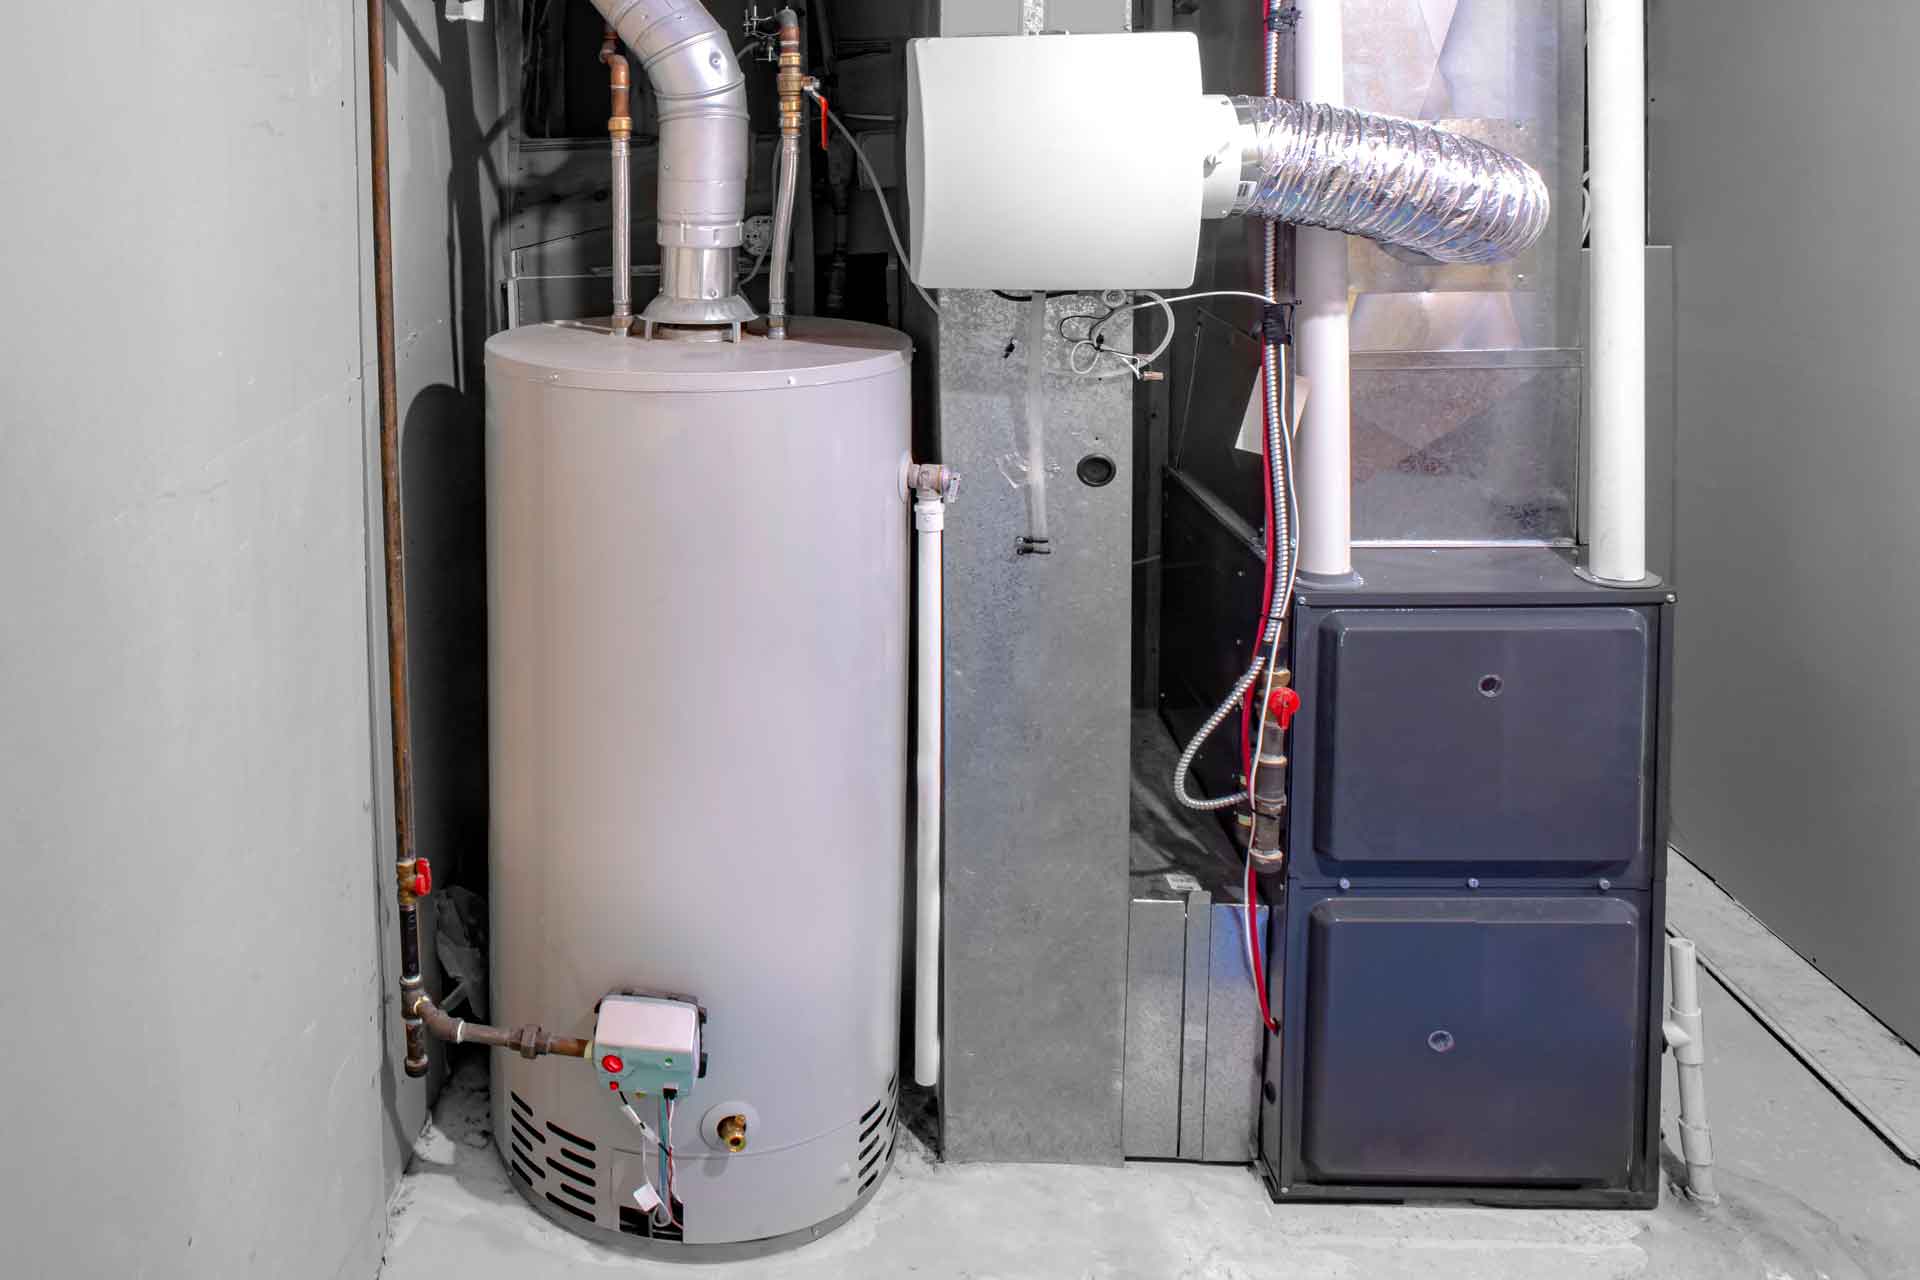 Water heater and furnace system